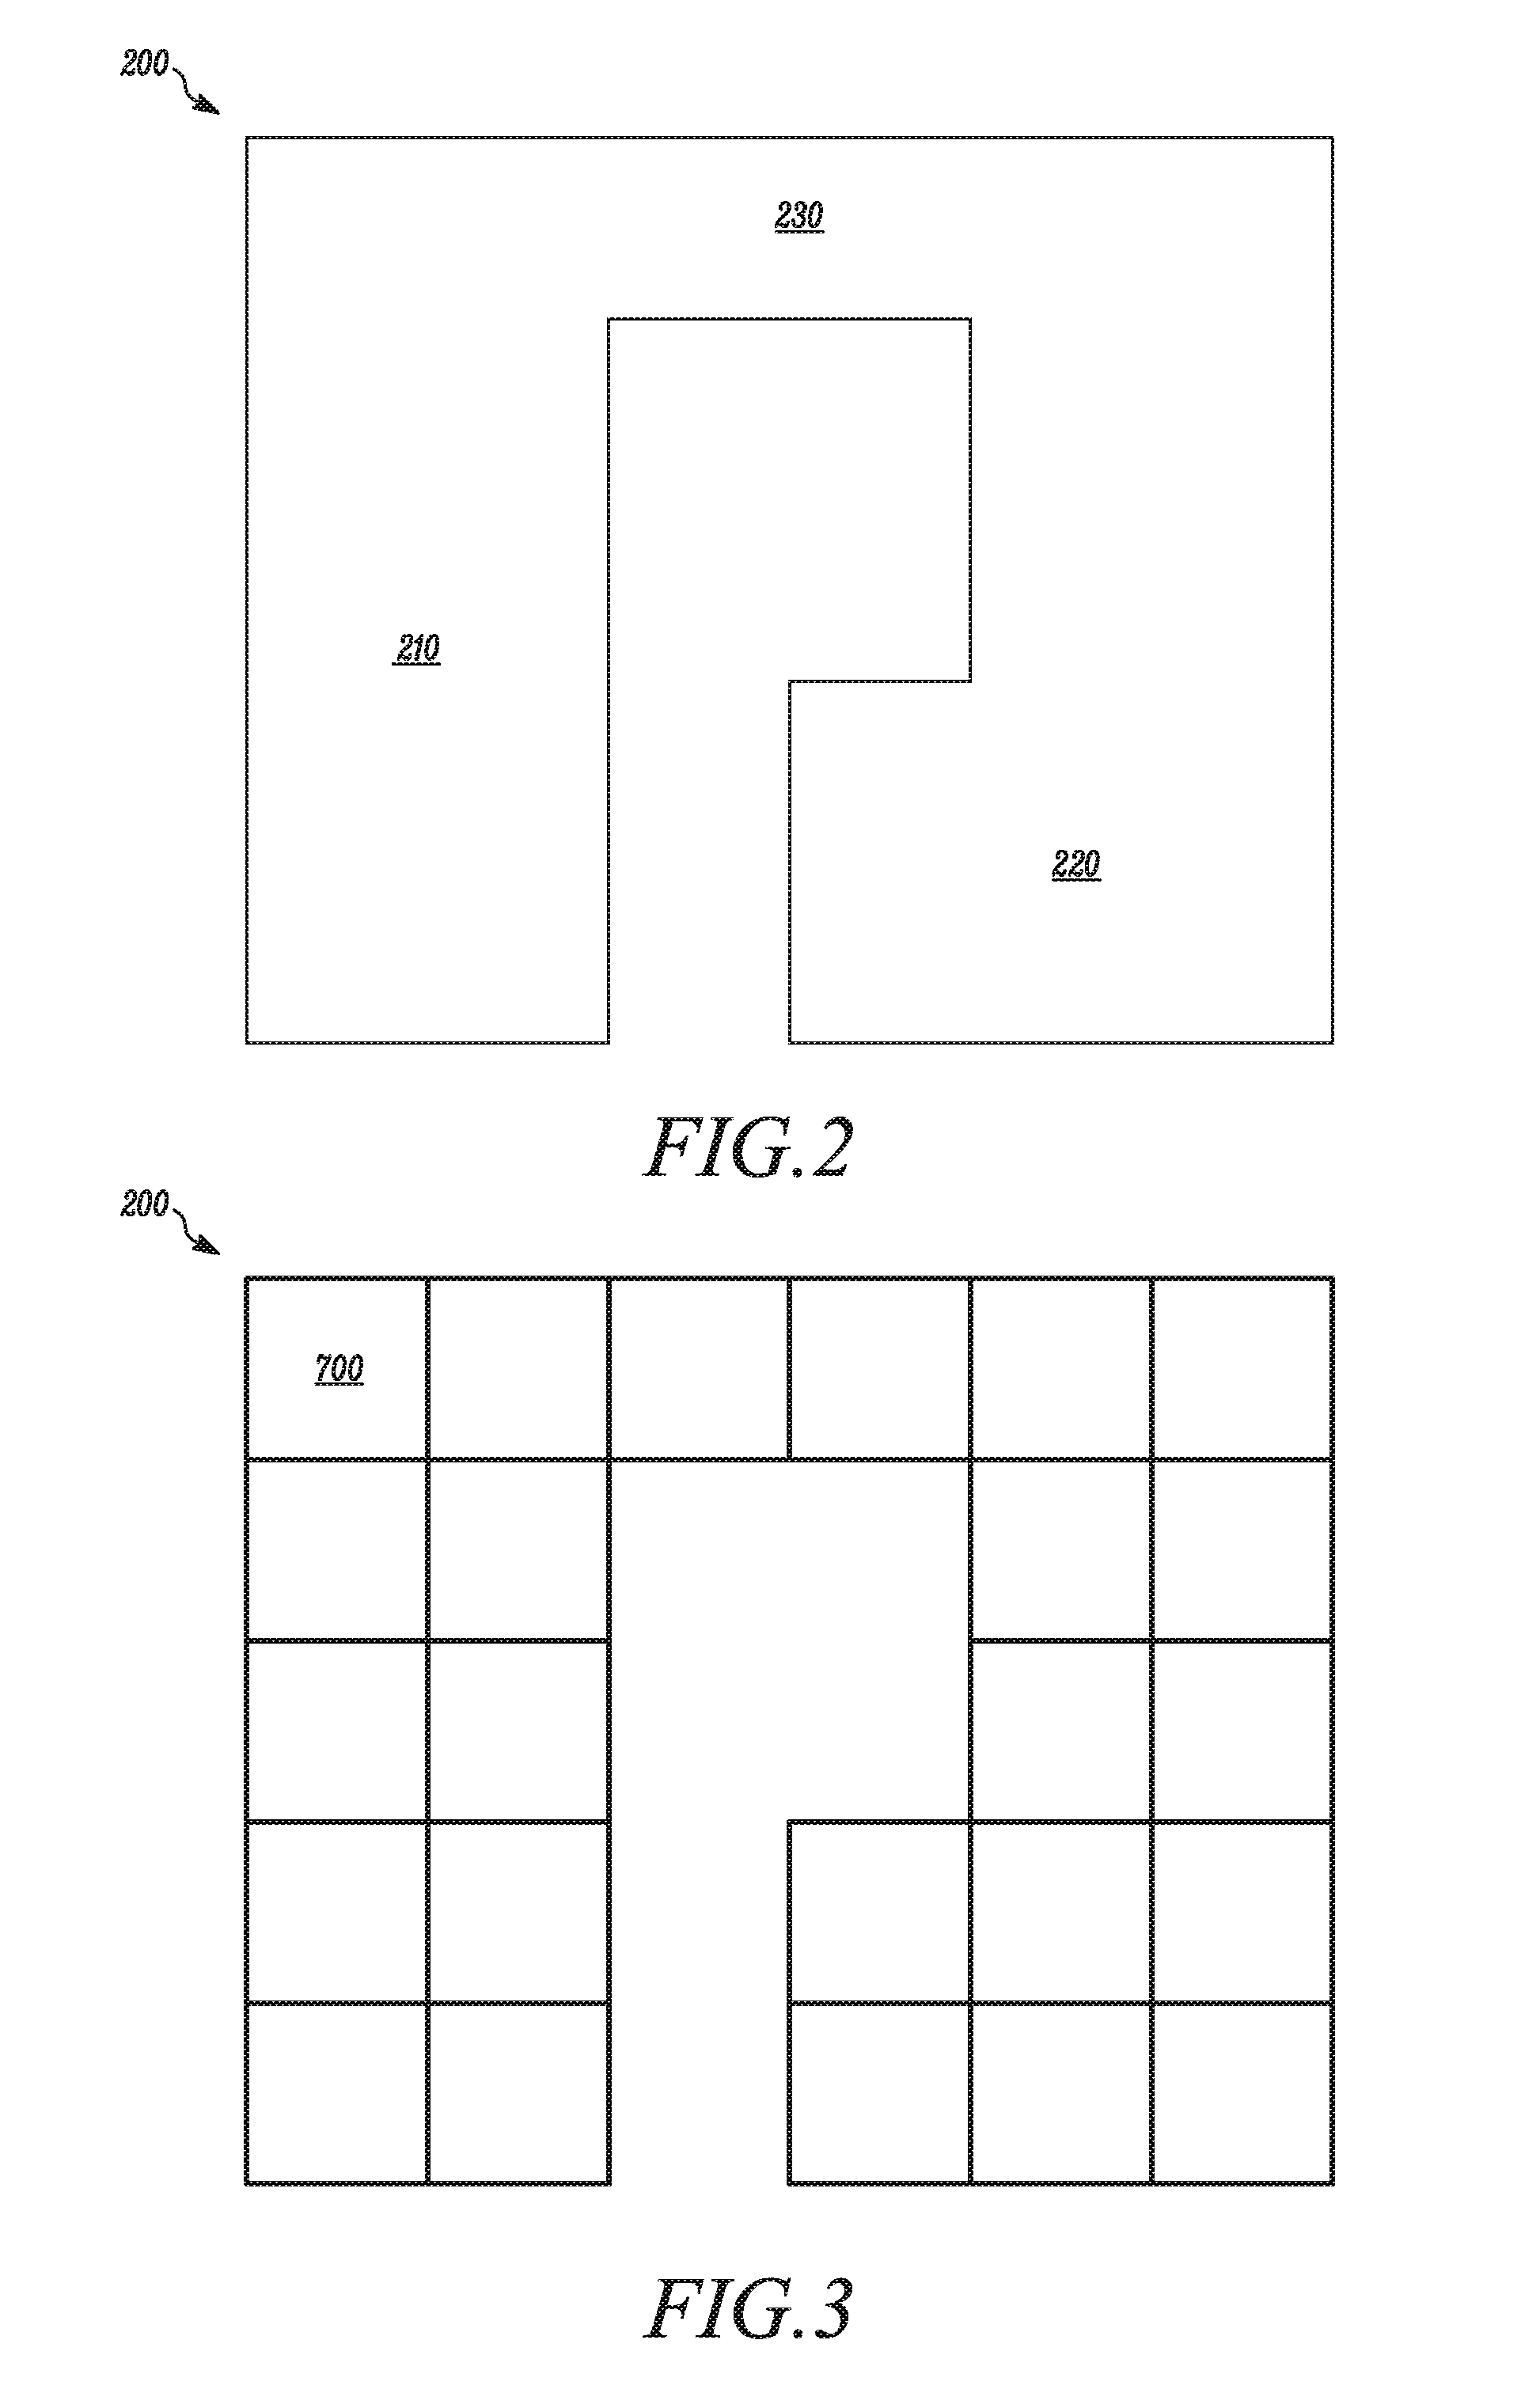 Method and System for Enhancing a Coverage Distribution of a Robotic Garden Tool